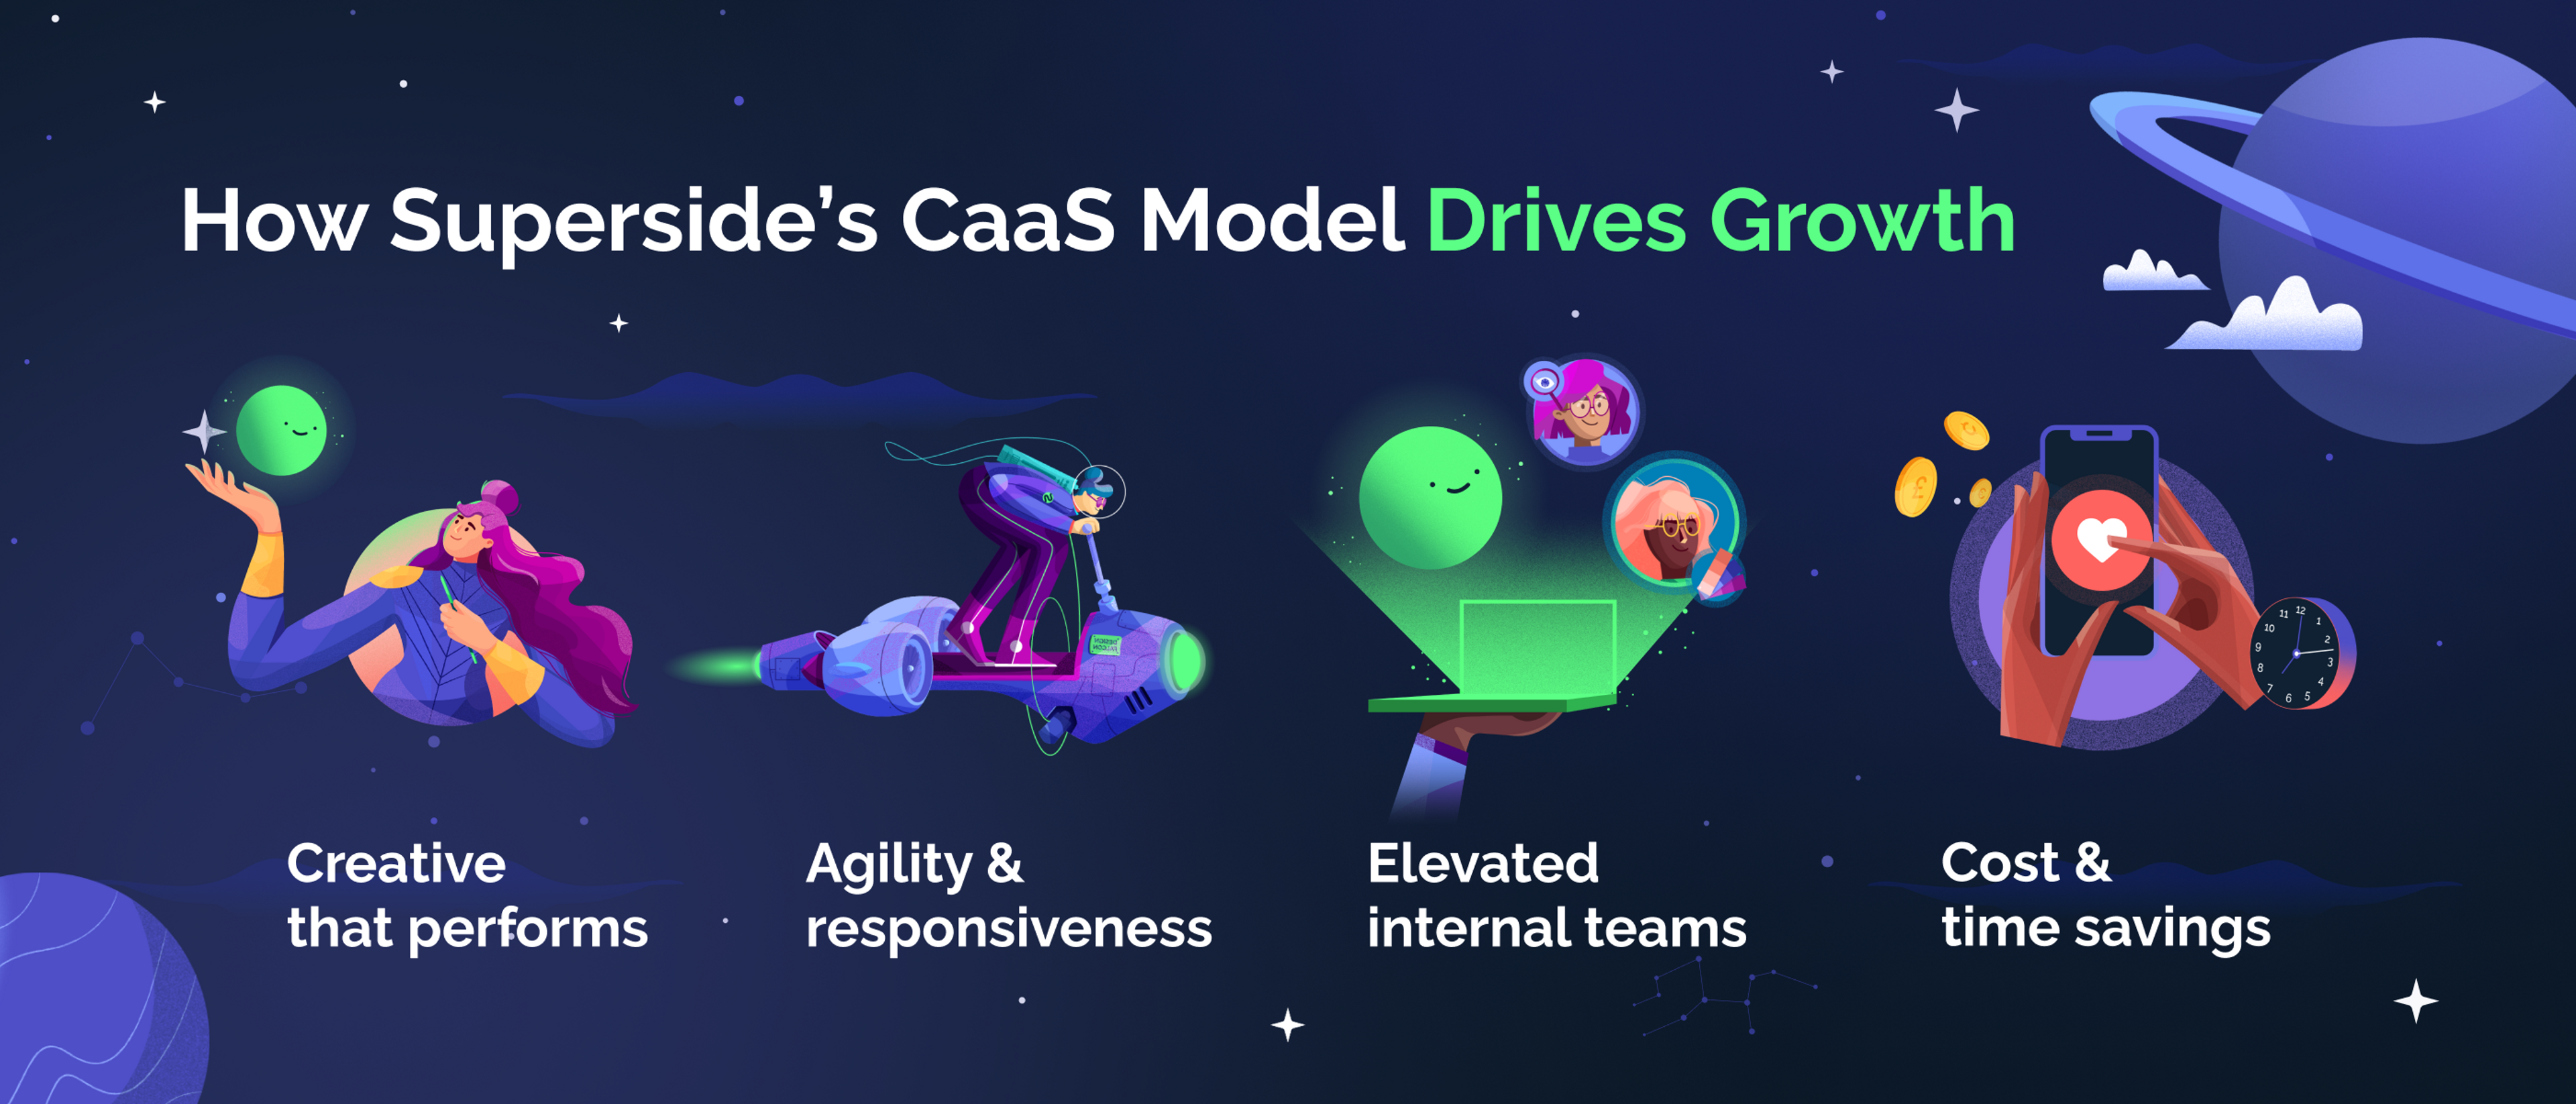 An infographic that explains that Superside's CaaS model drives growth through creative that performs, greater agility and responsiveness, elevated teams, cost-effectiveness and time-savings. 